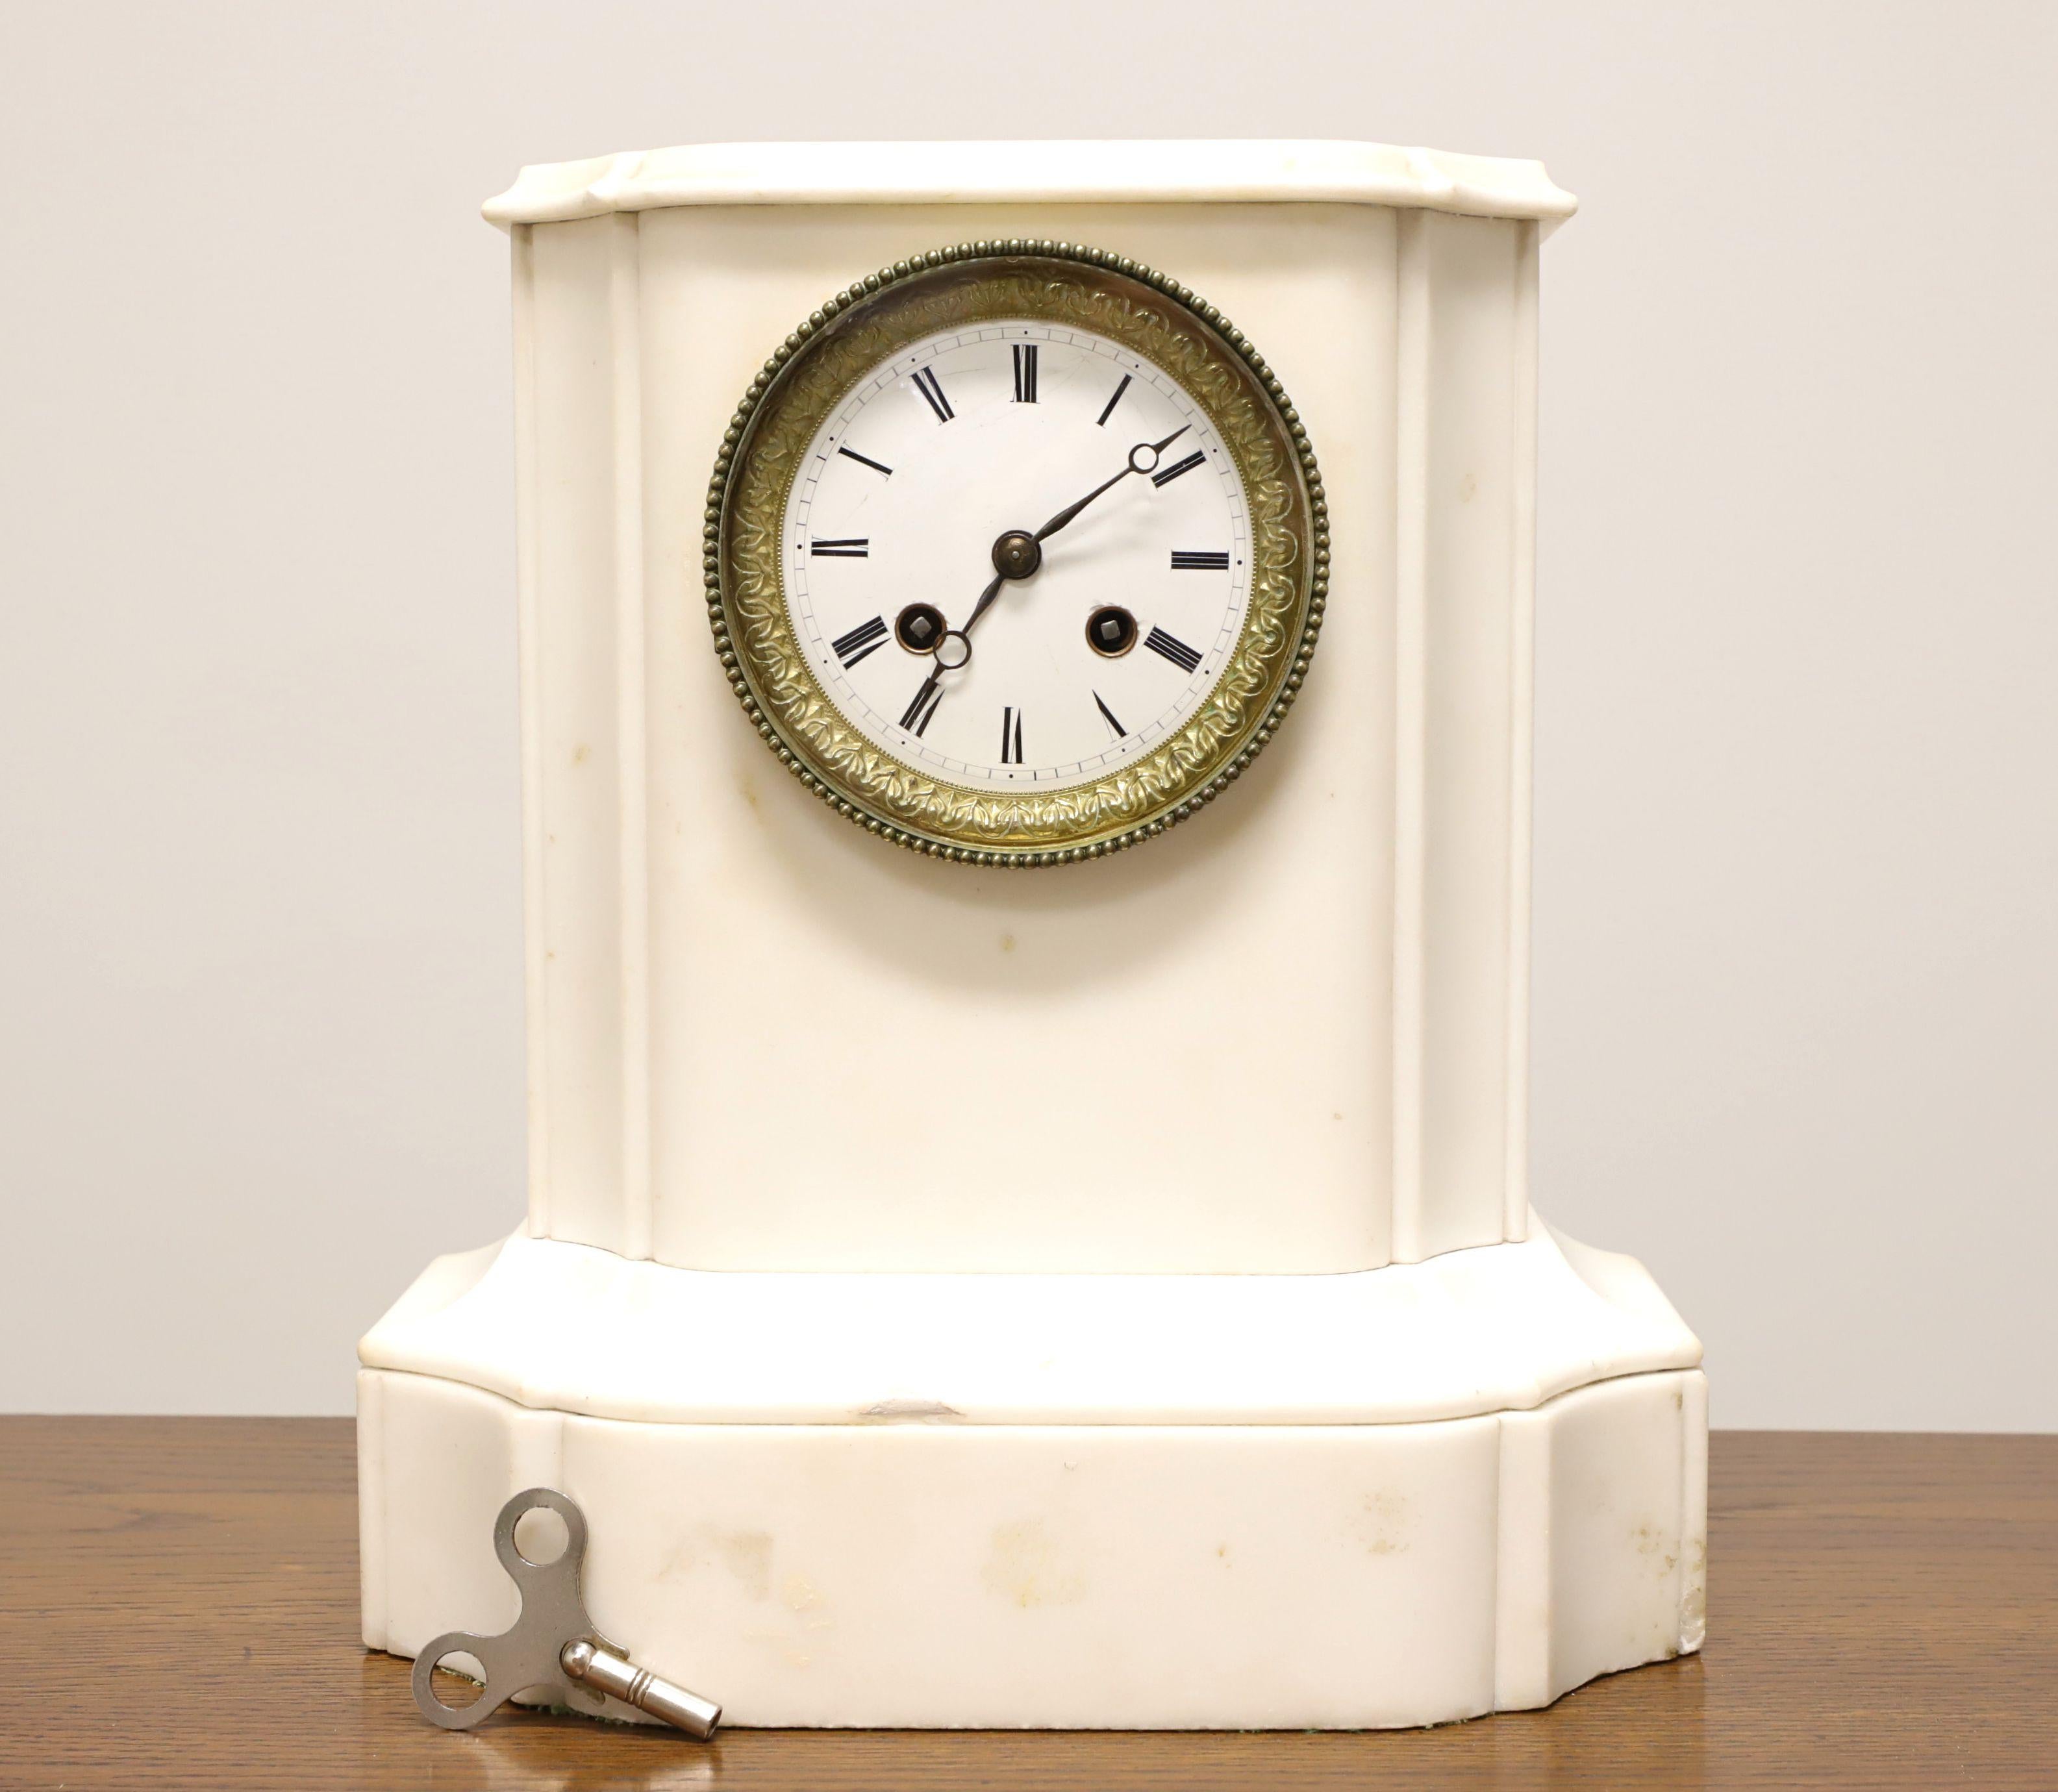 An antique Empire style marble chime mantel clock, unbranded. White marble encasing the clock works. Round decorative brass encased glass covered clock face has Roman numbers marking the hours, dash for minutes, hour and minute hands. Opens for